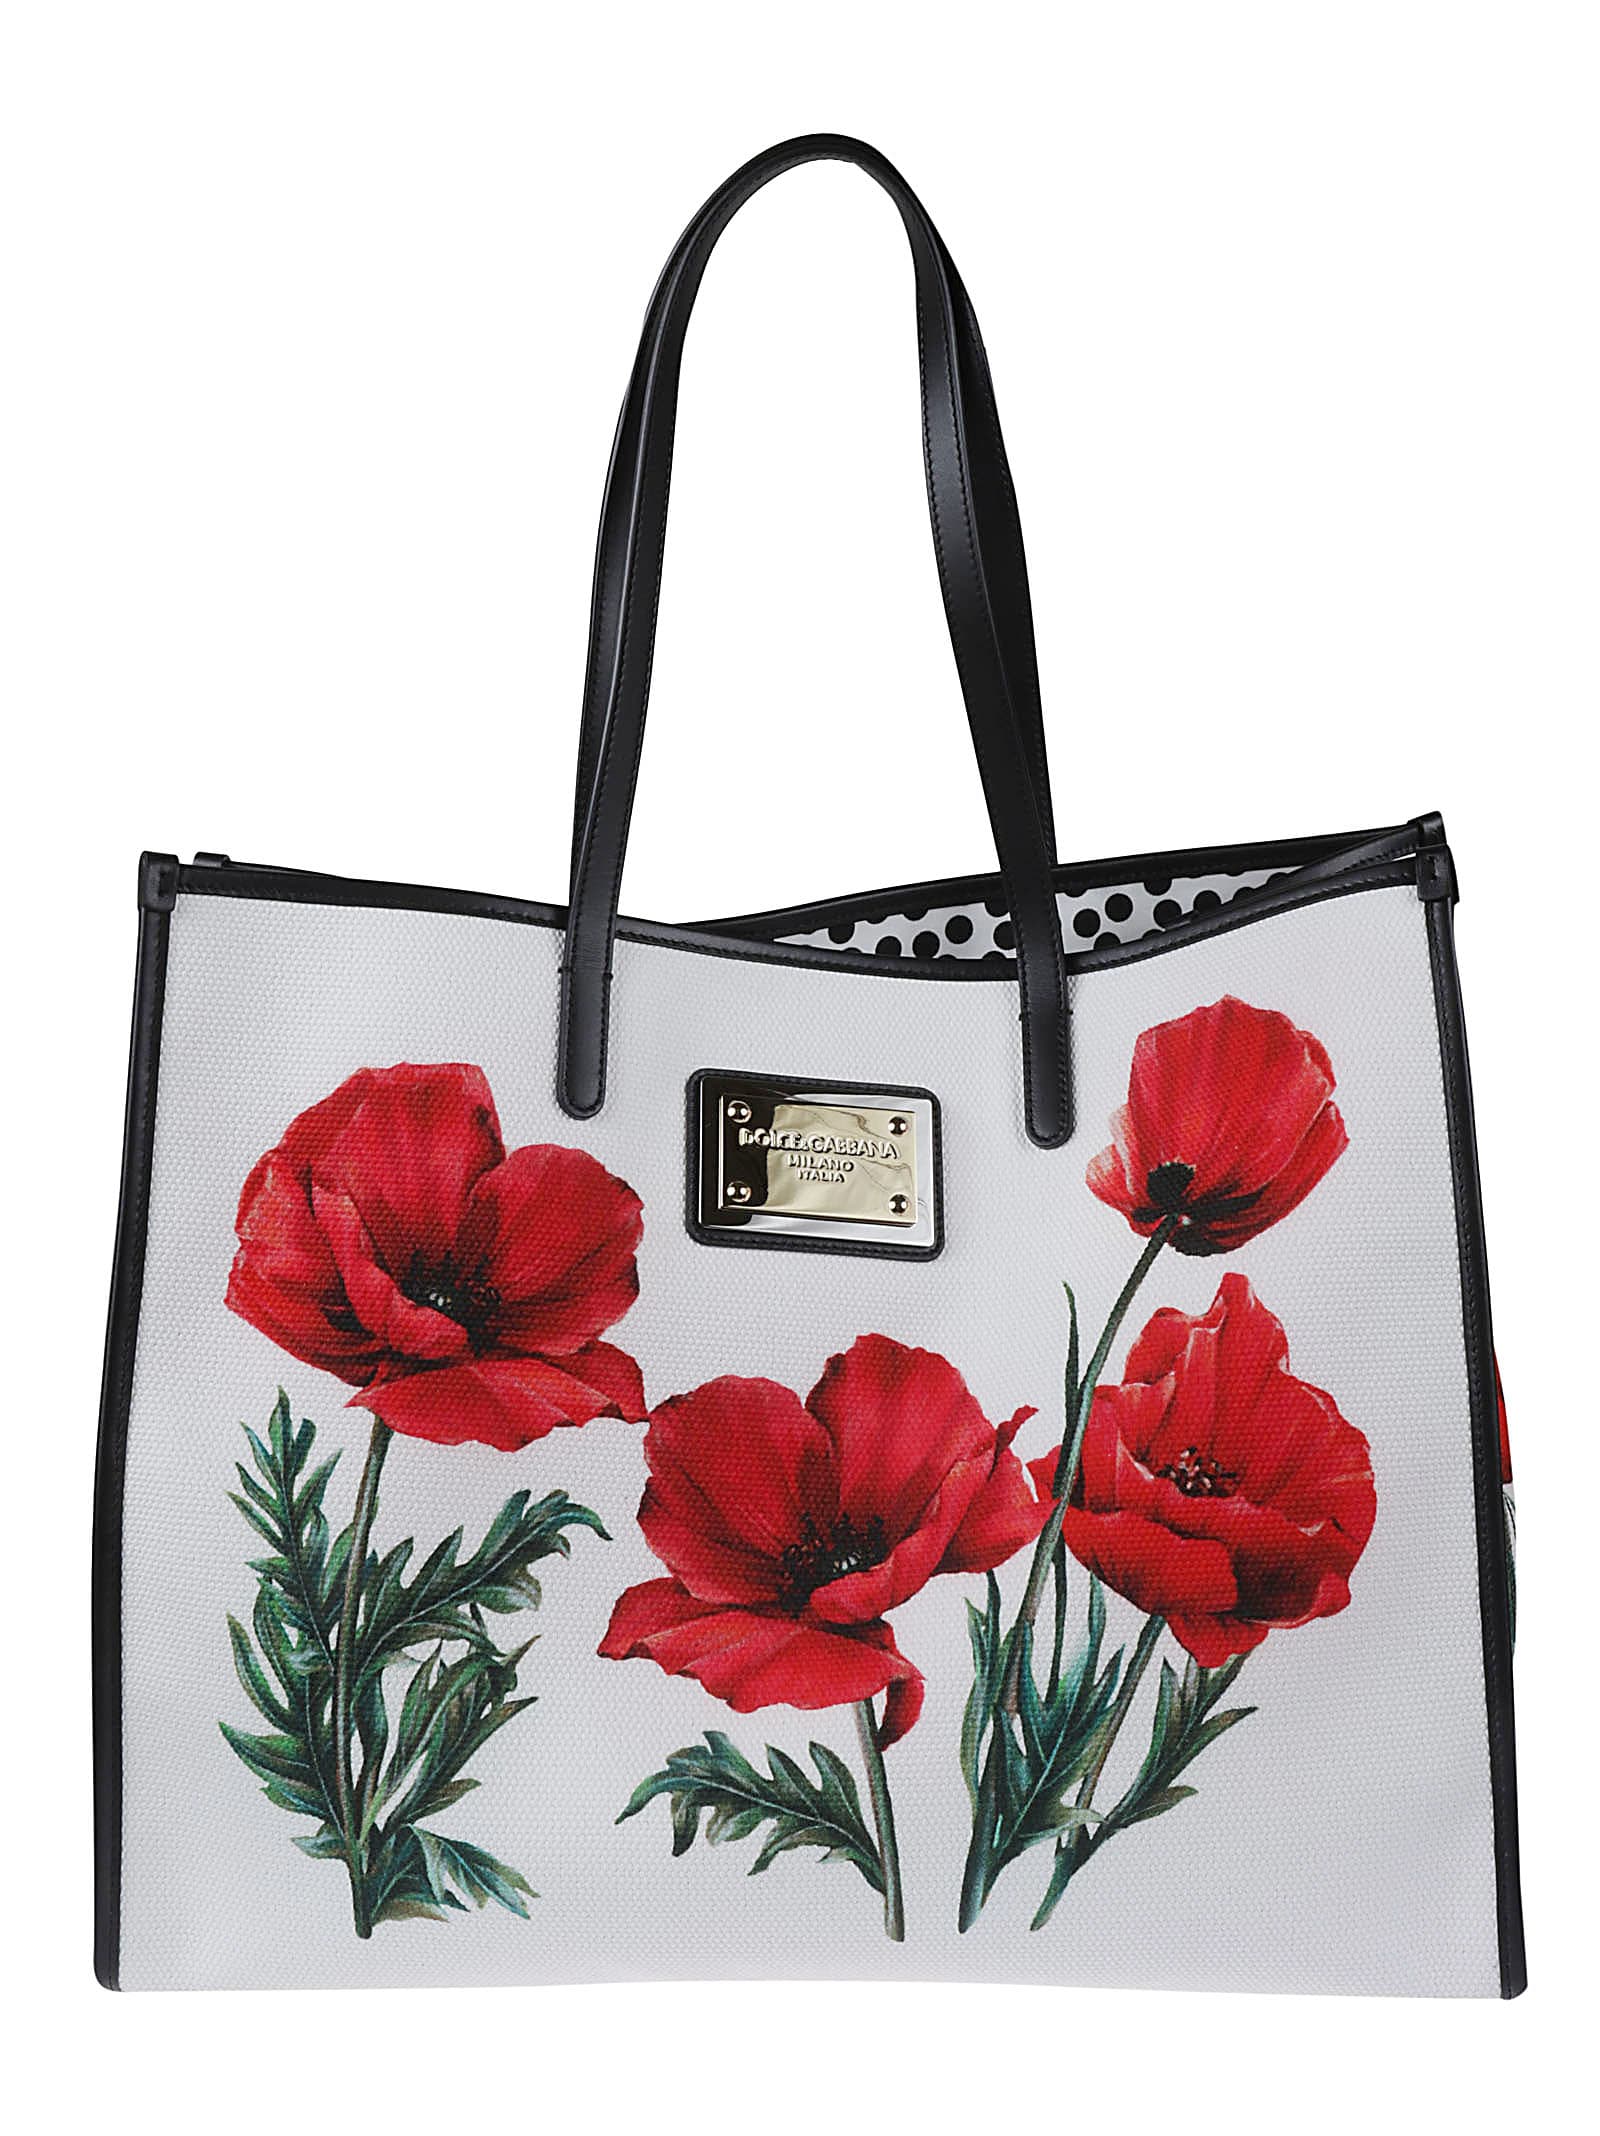 Dolce & Gabbana Floral Canvas Shopping Tote